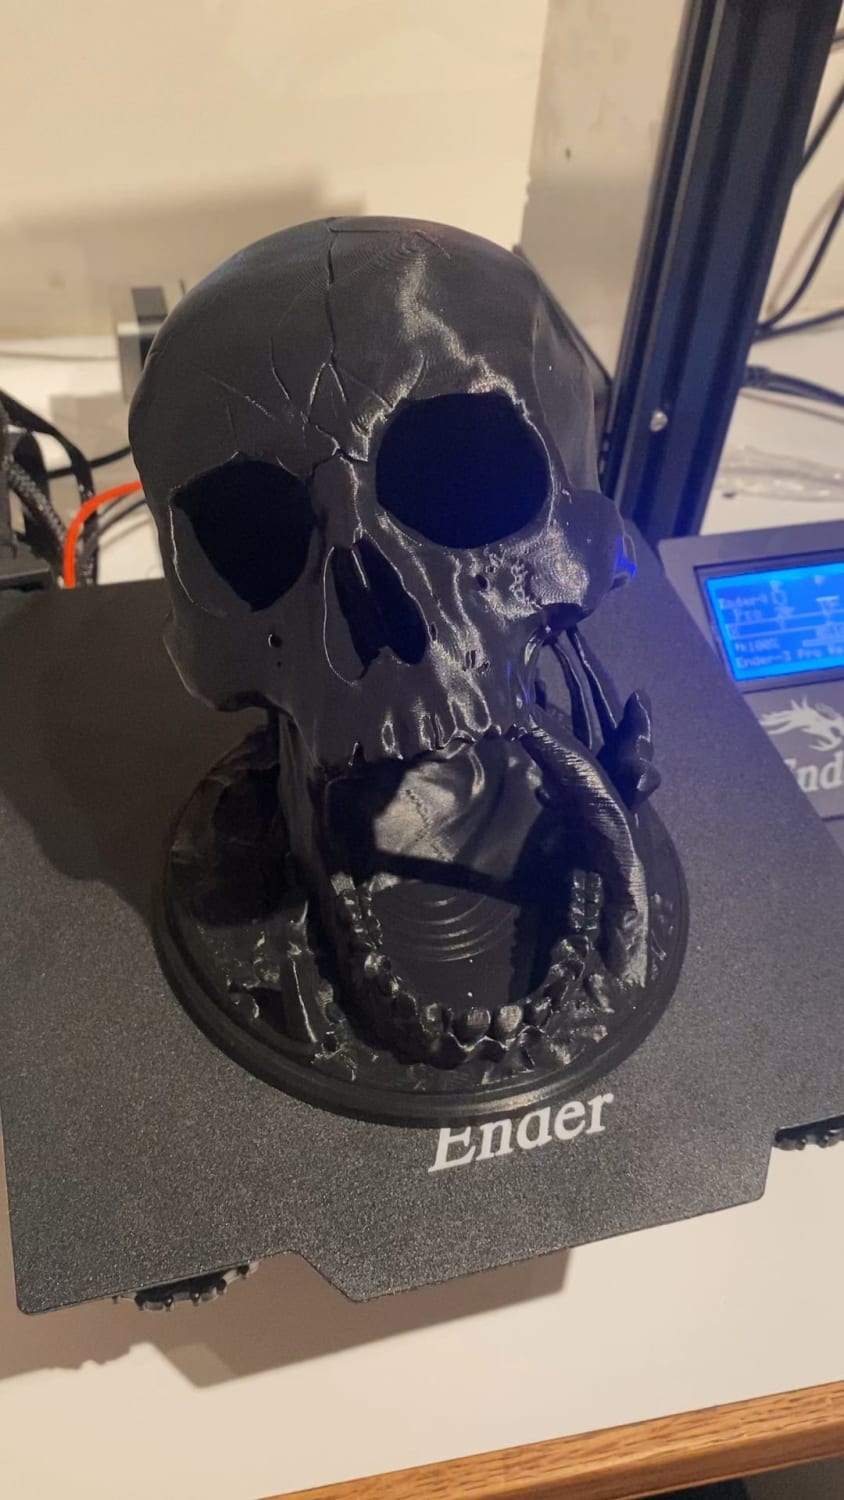 After only having my printer for 2 days, 2 successful prints and 2 fails, I went for it and started printing a 46 hour dice tower. Pretty stoked on the results considering this is my first “big” print, and I didn’t get any spaghetti! Too bad I still roll like crap.